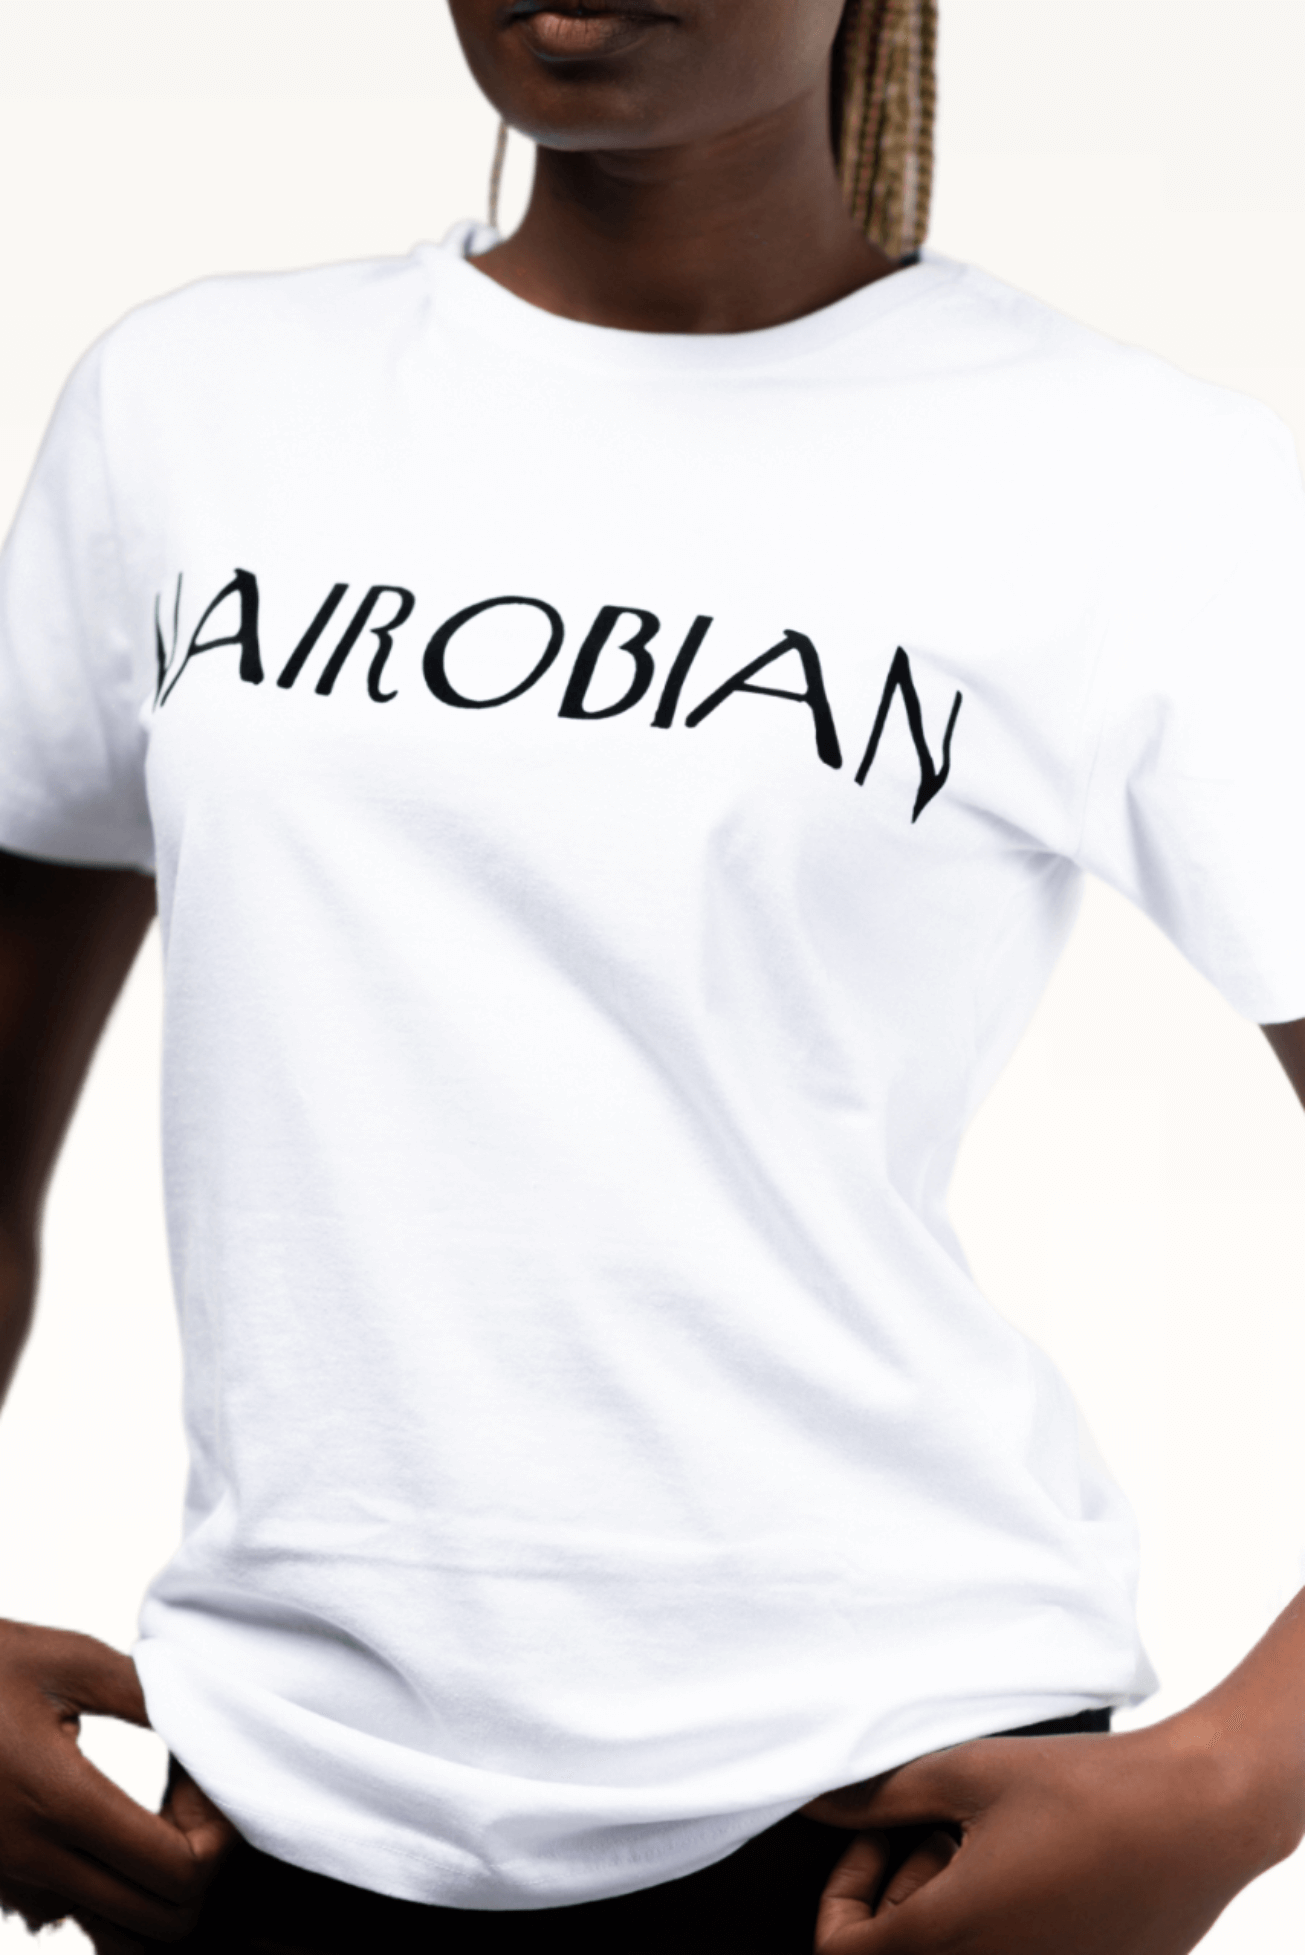 Shop Nairobian Plain T-Shirt (Black Text Print) by Kali Works on Arrai. Discover stylish, affordable clothing, jewelry, handbags and unique handmade pieces from top Kenyan & African fashion brands prioritising sustainability and quality craftsmanship.